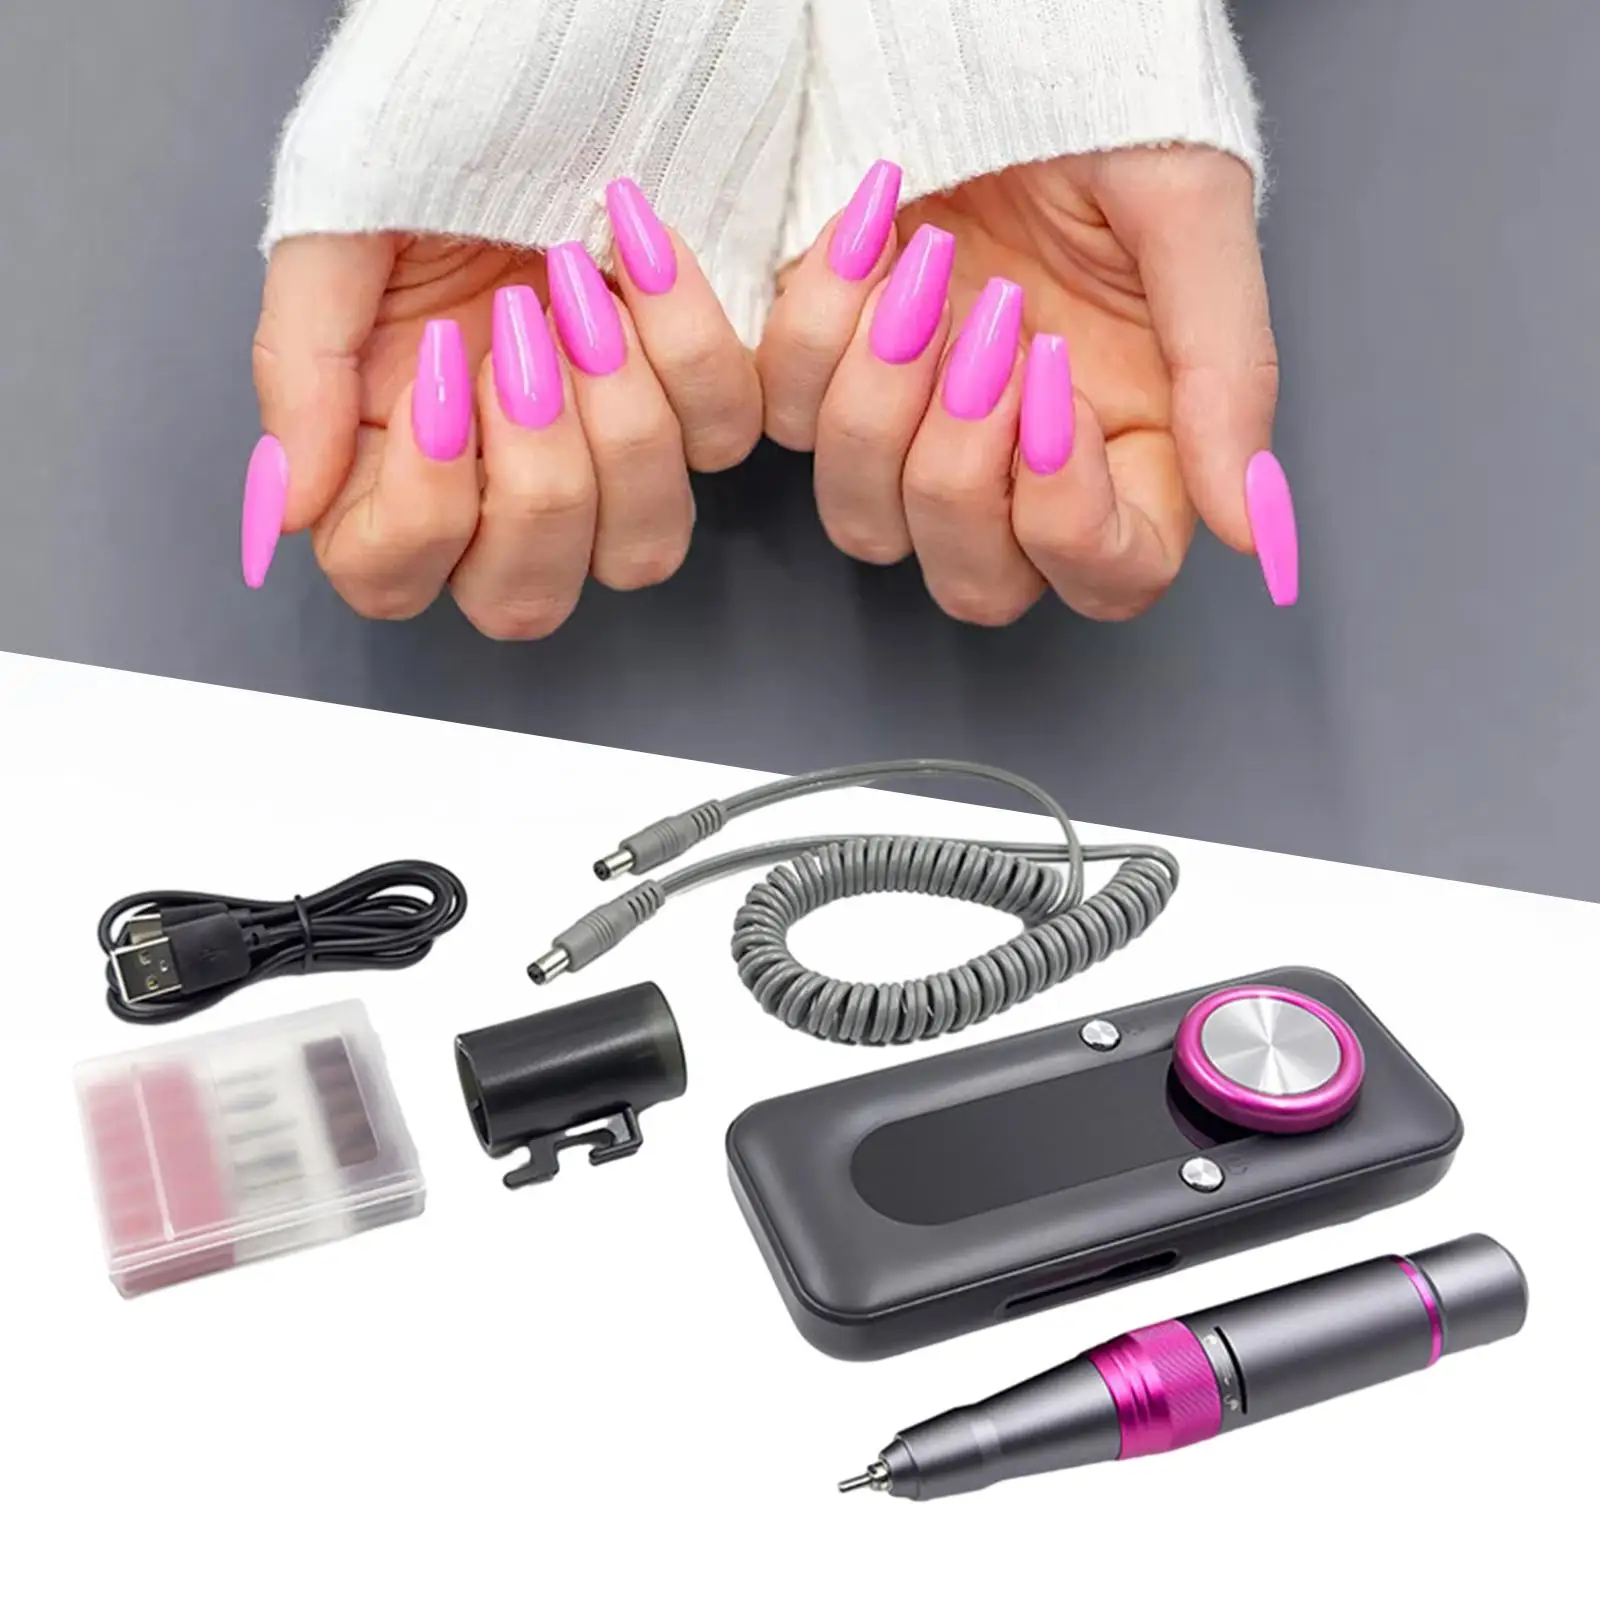 Electric Nail Drill Machine USB Rechargeable with Nail Bits Cordless Efile for Removing Grinding Polishing Cutting Acrylic Nail